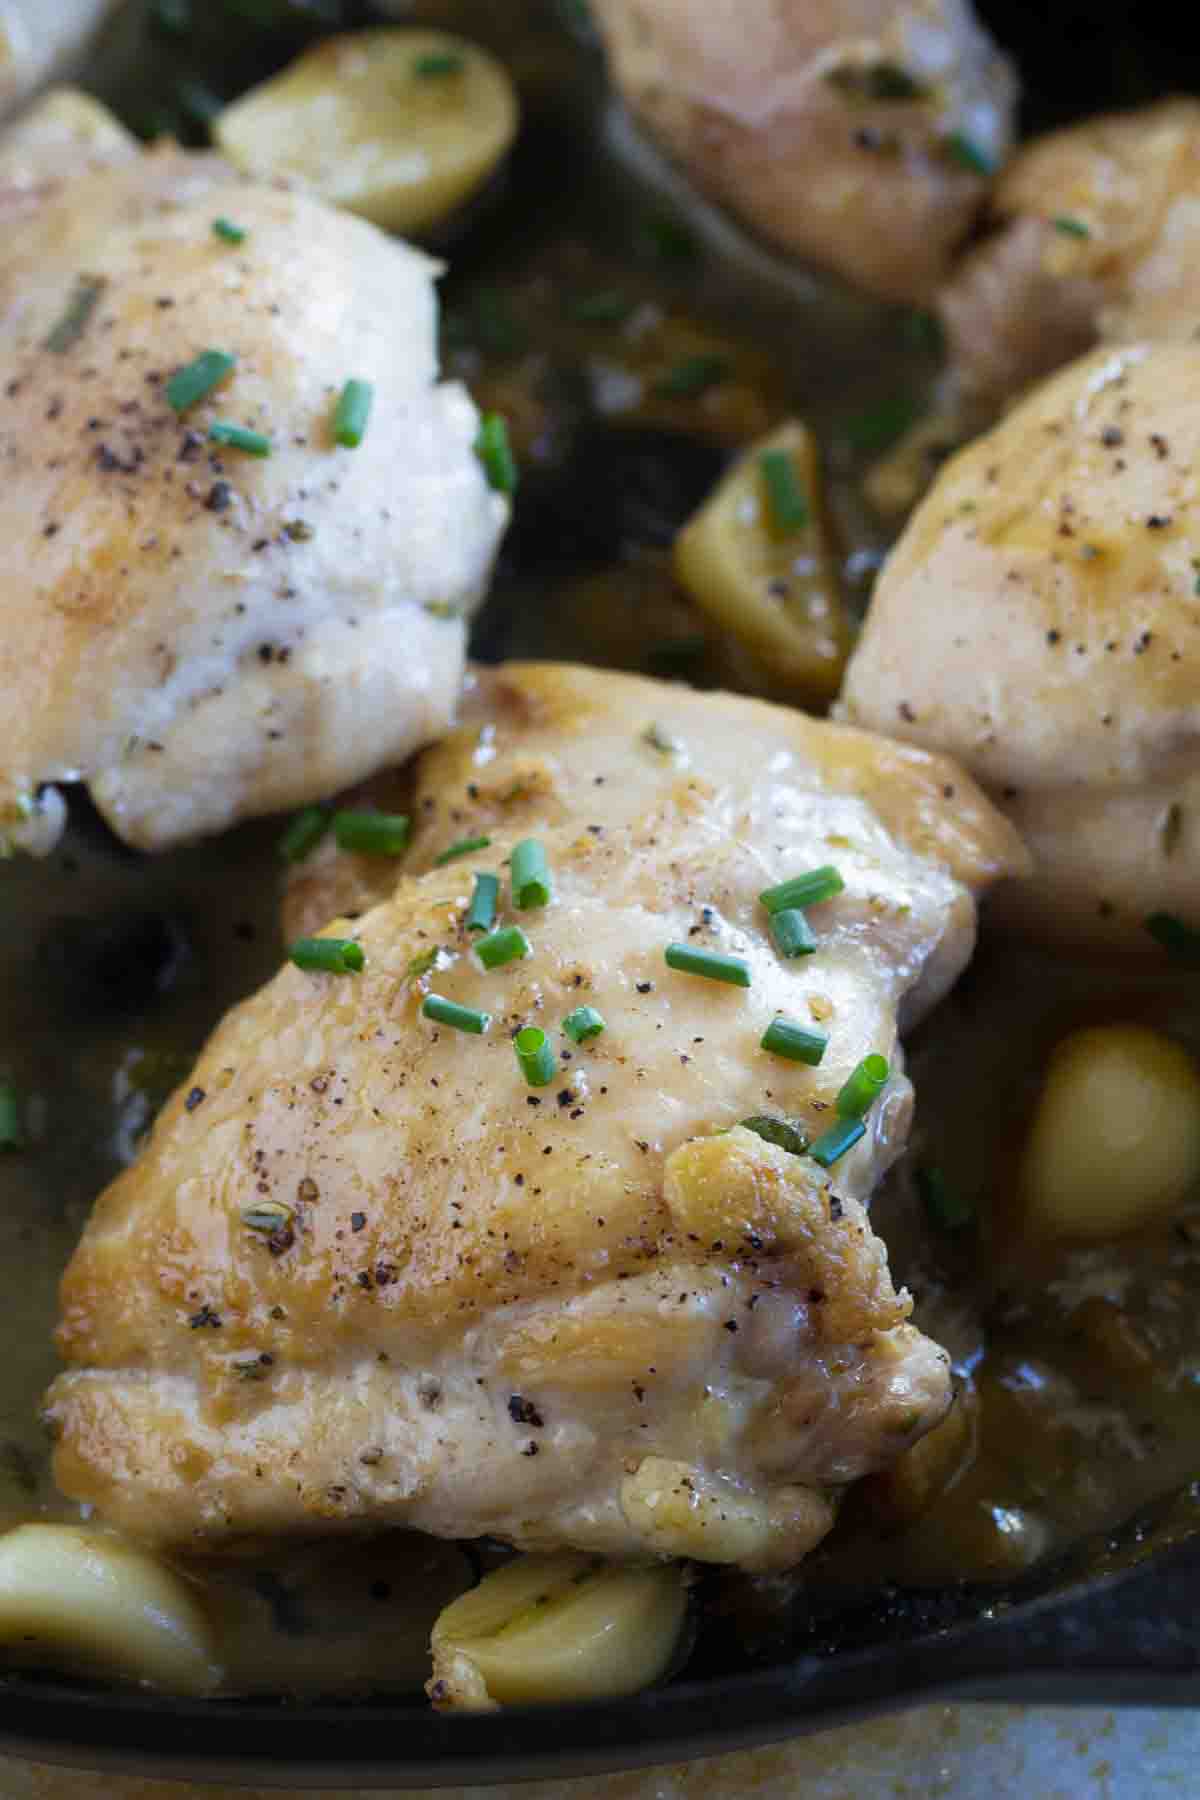 Chicken thigh cooked in a cast iron skillet topped with chives.